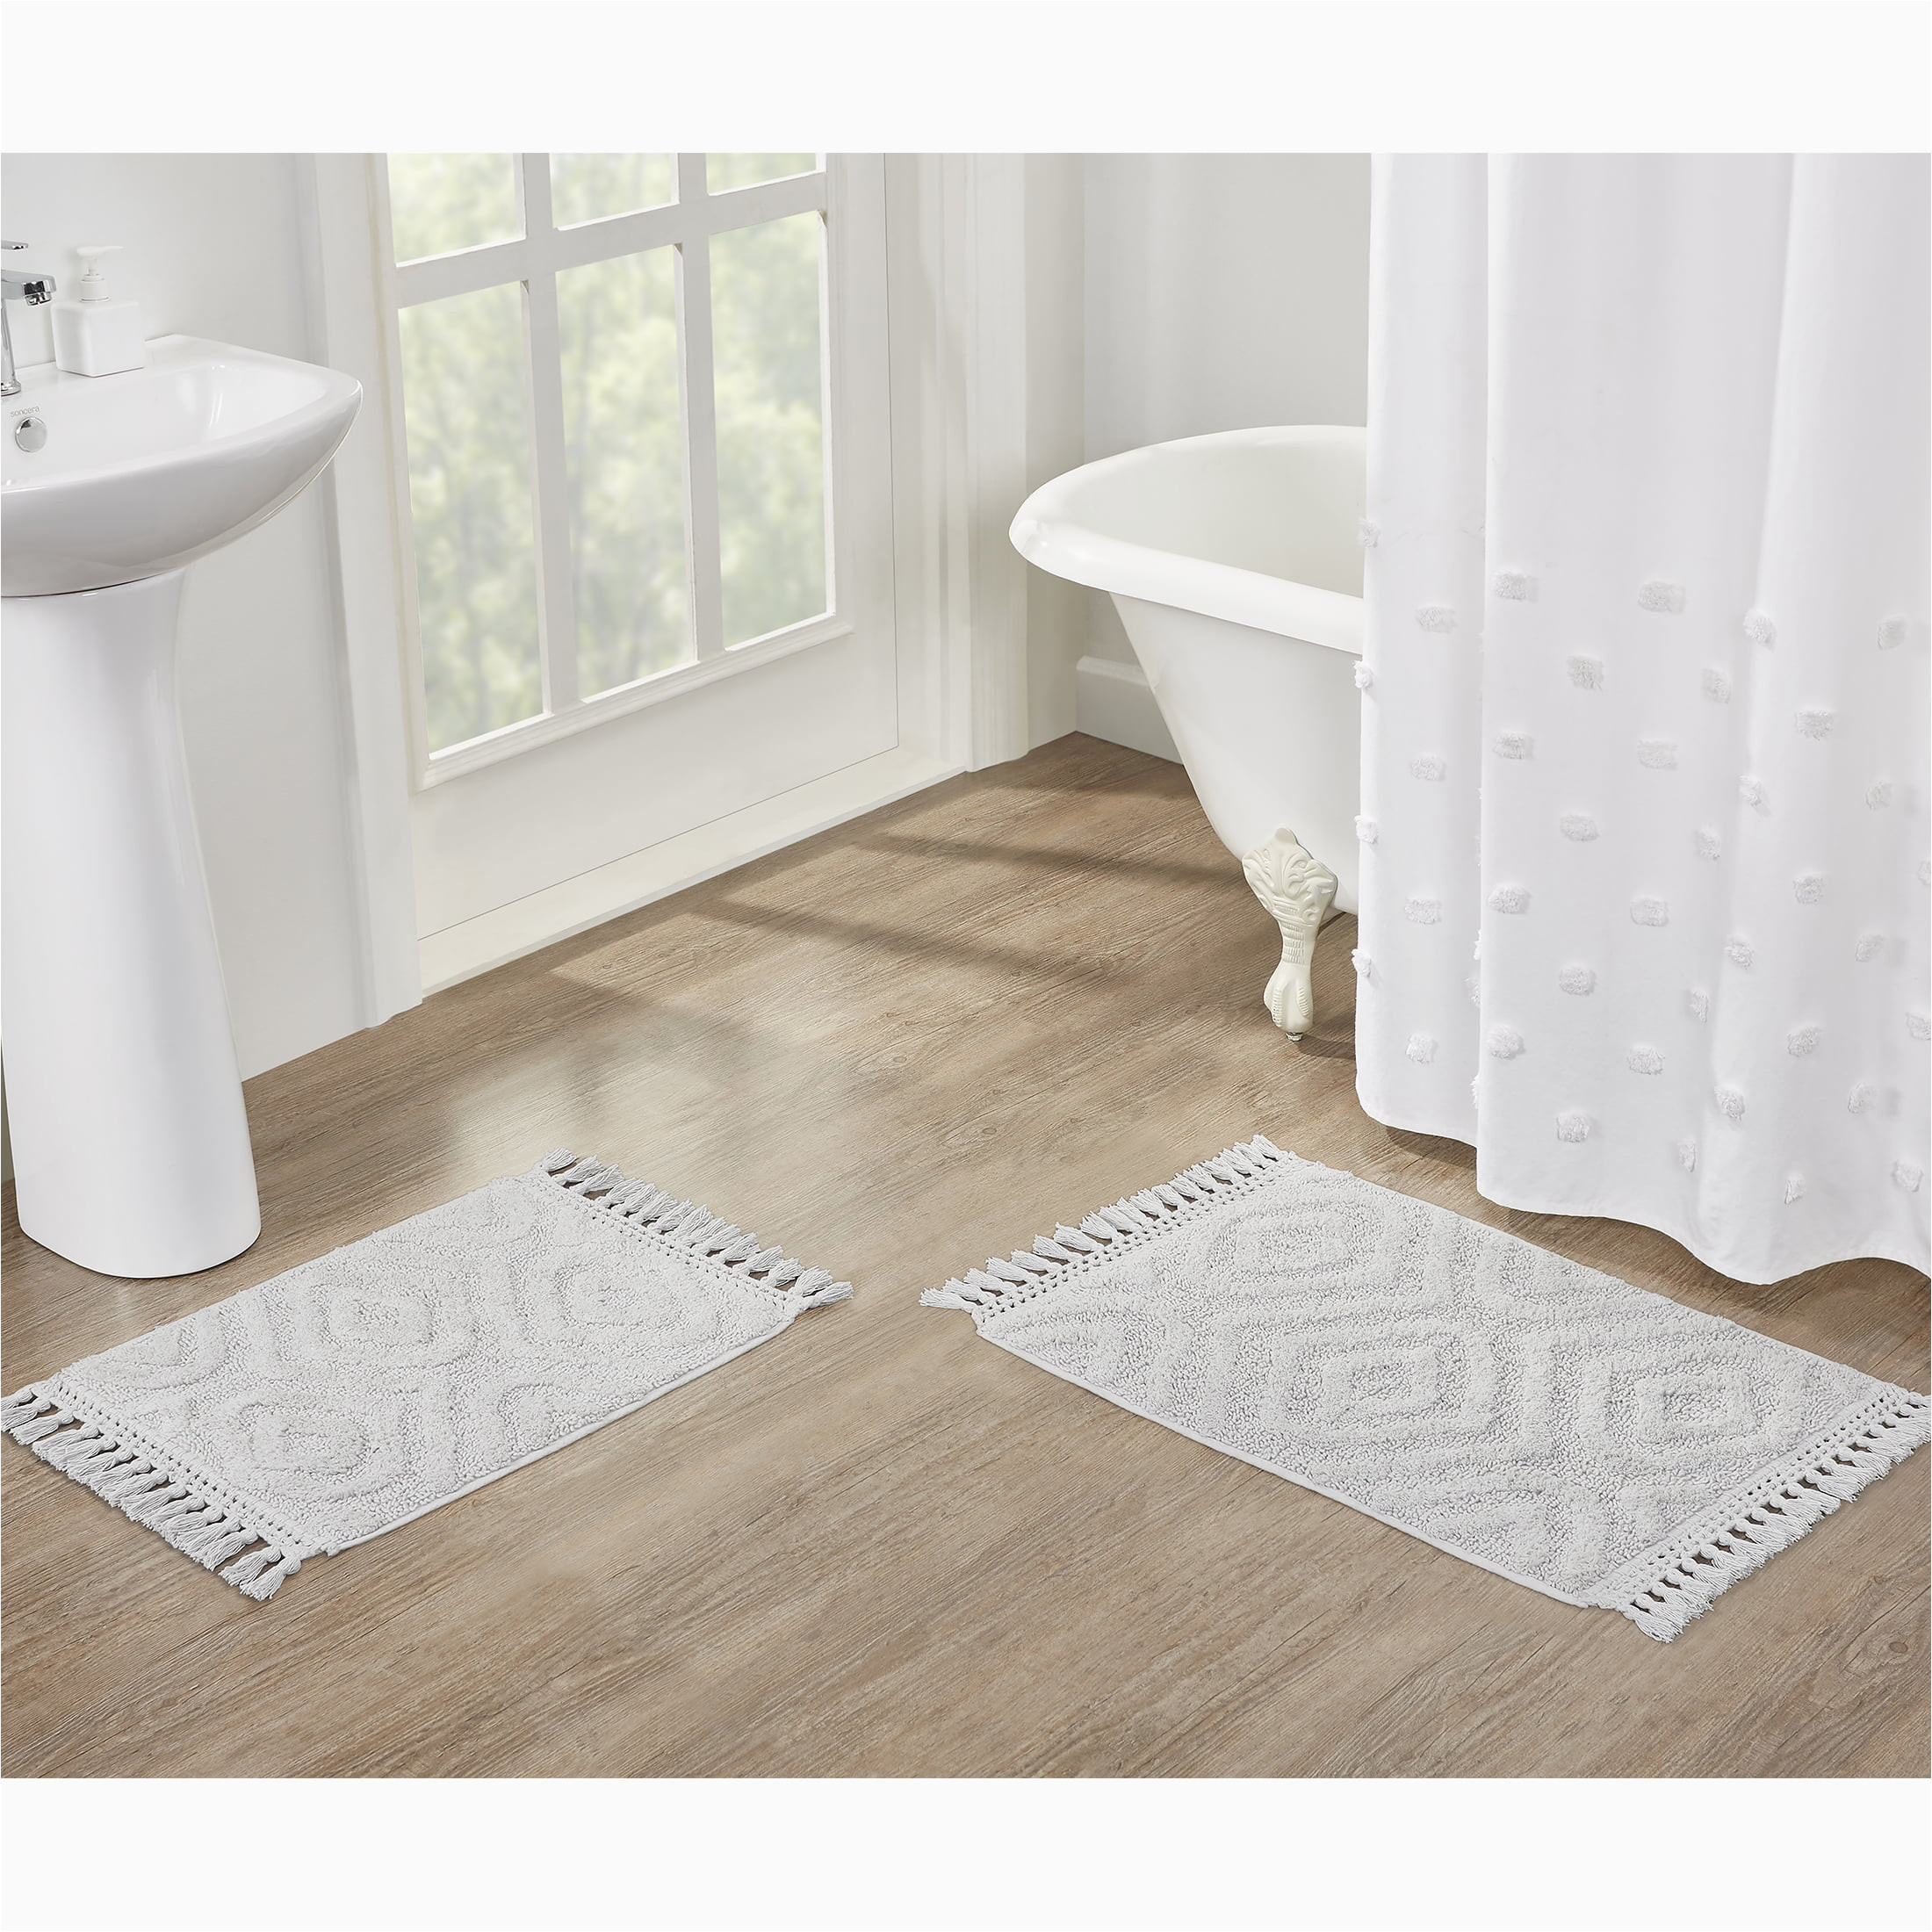 Better Homes and Gardens Cotton Bath Rug Better Homes & Gardens Geometric Fringe Cotton Bath Rug Set, 2 …